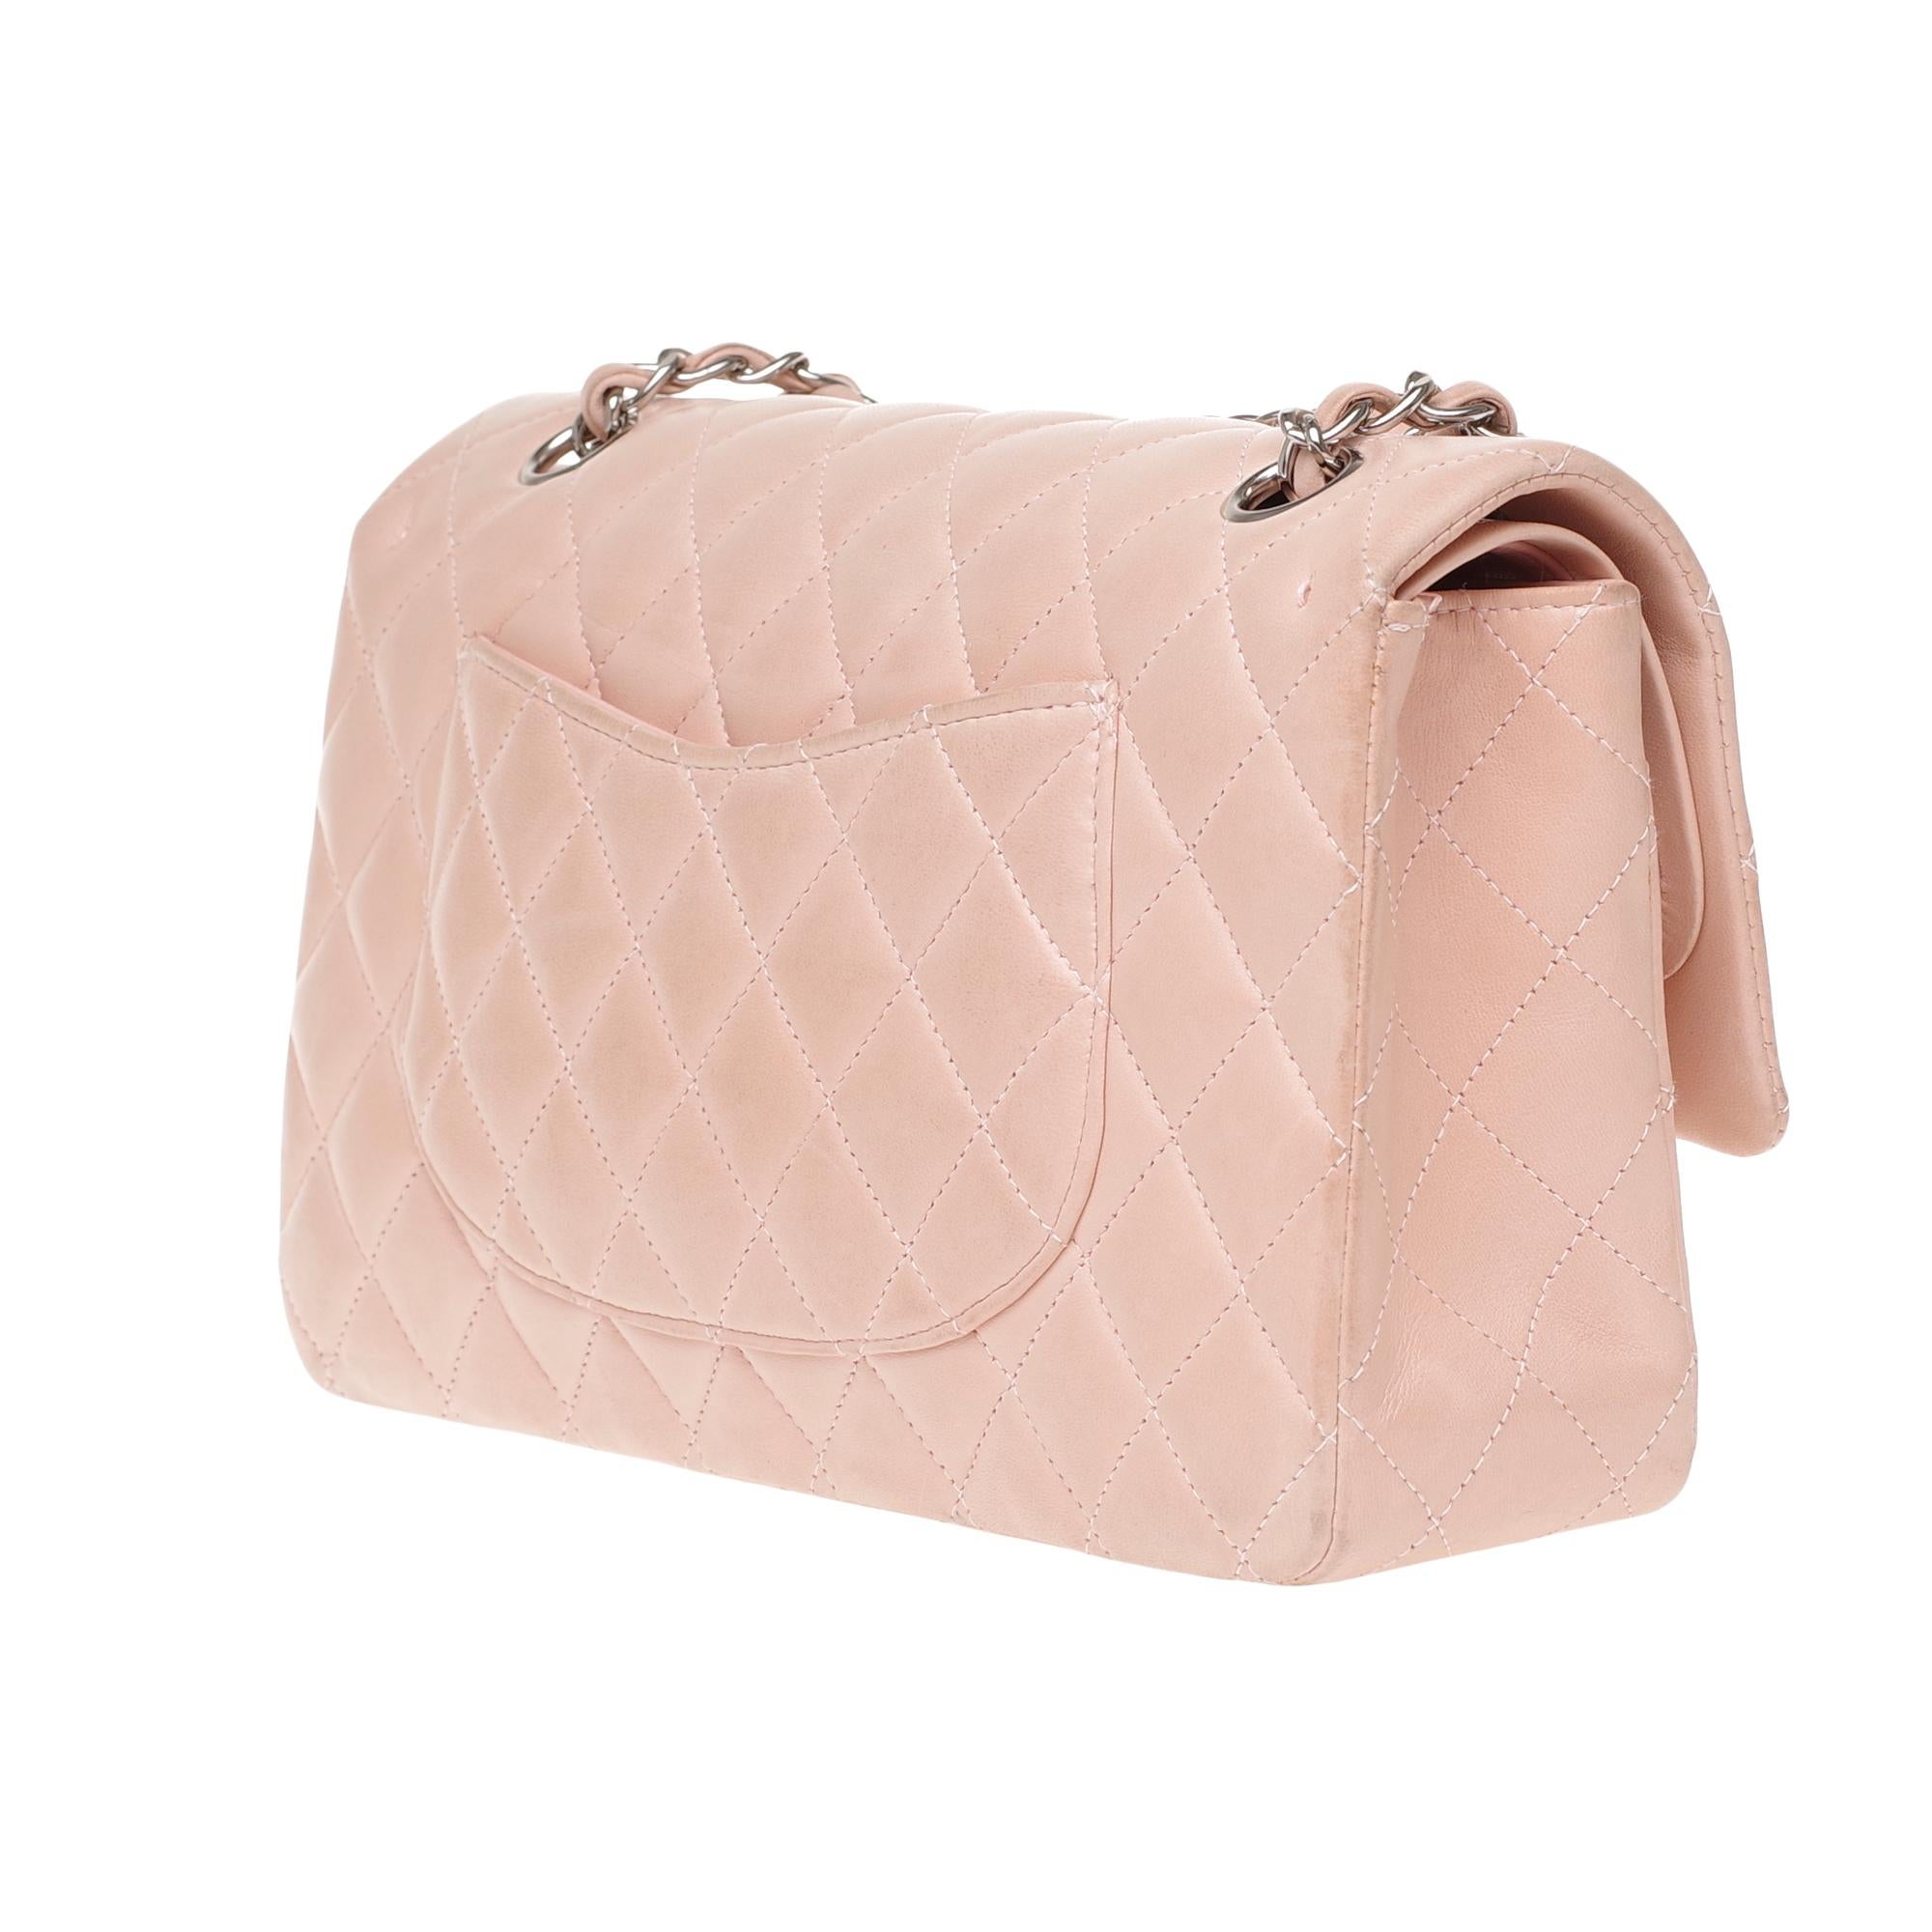 Beige Chanel Timeless medium handbag in pink quilted leather and silver hardware